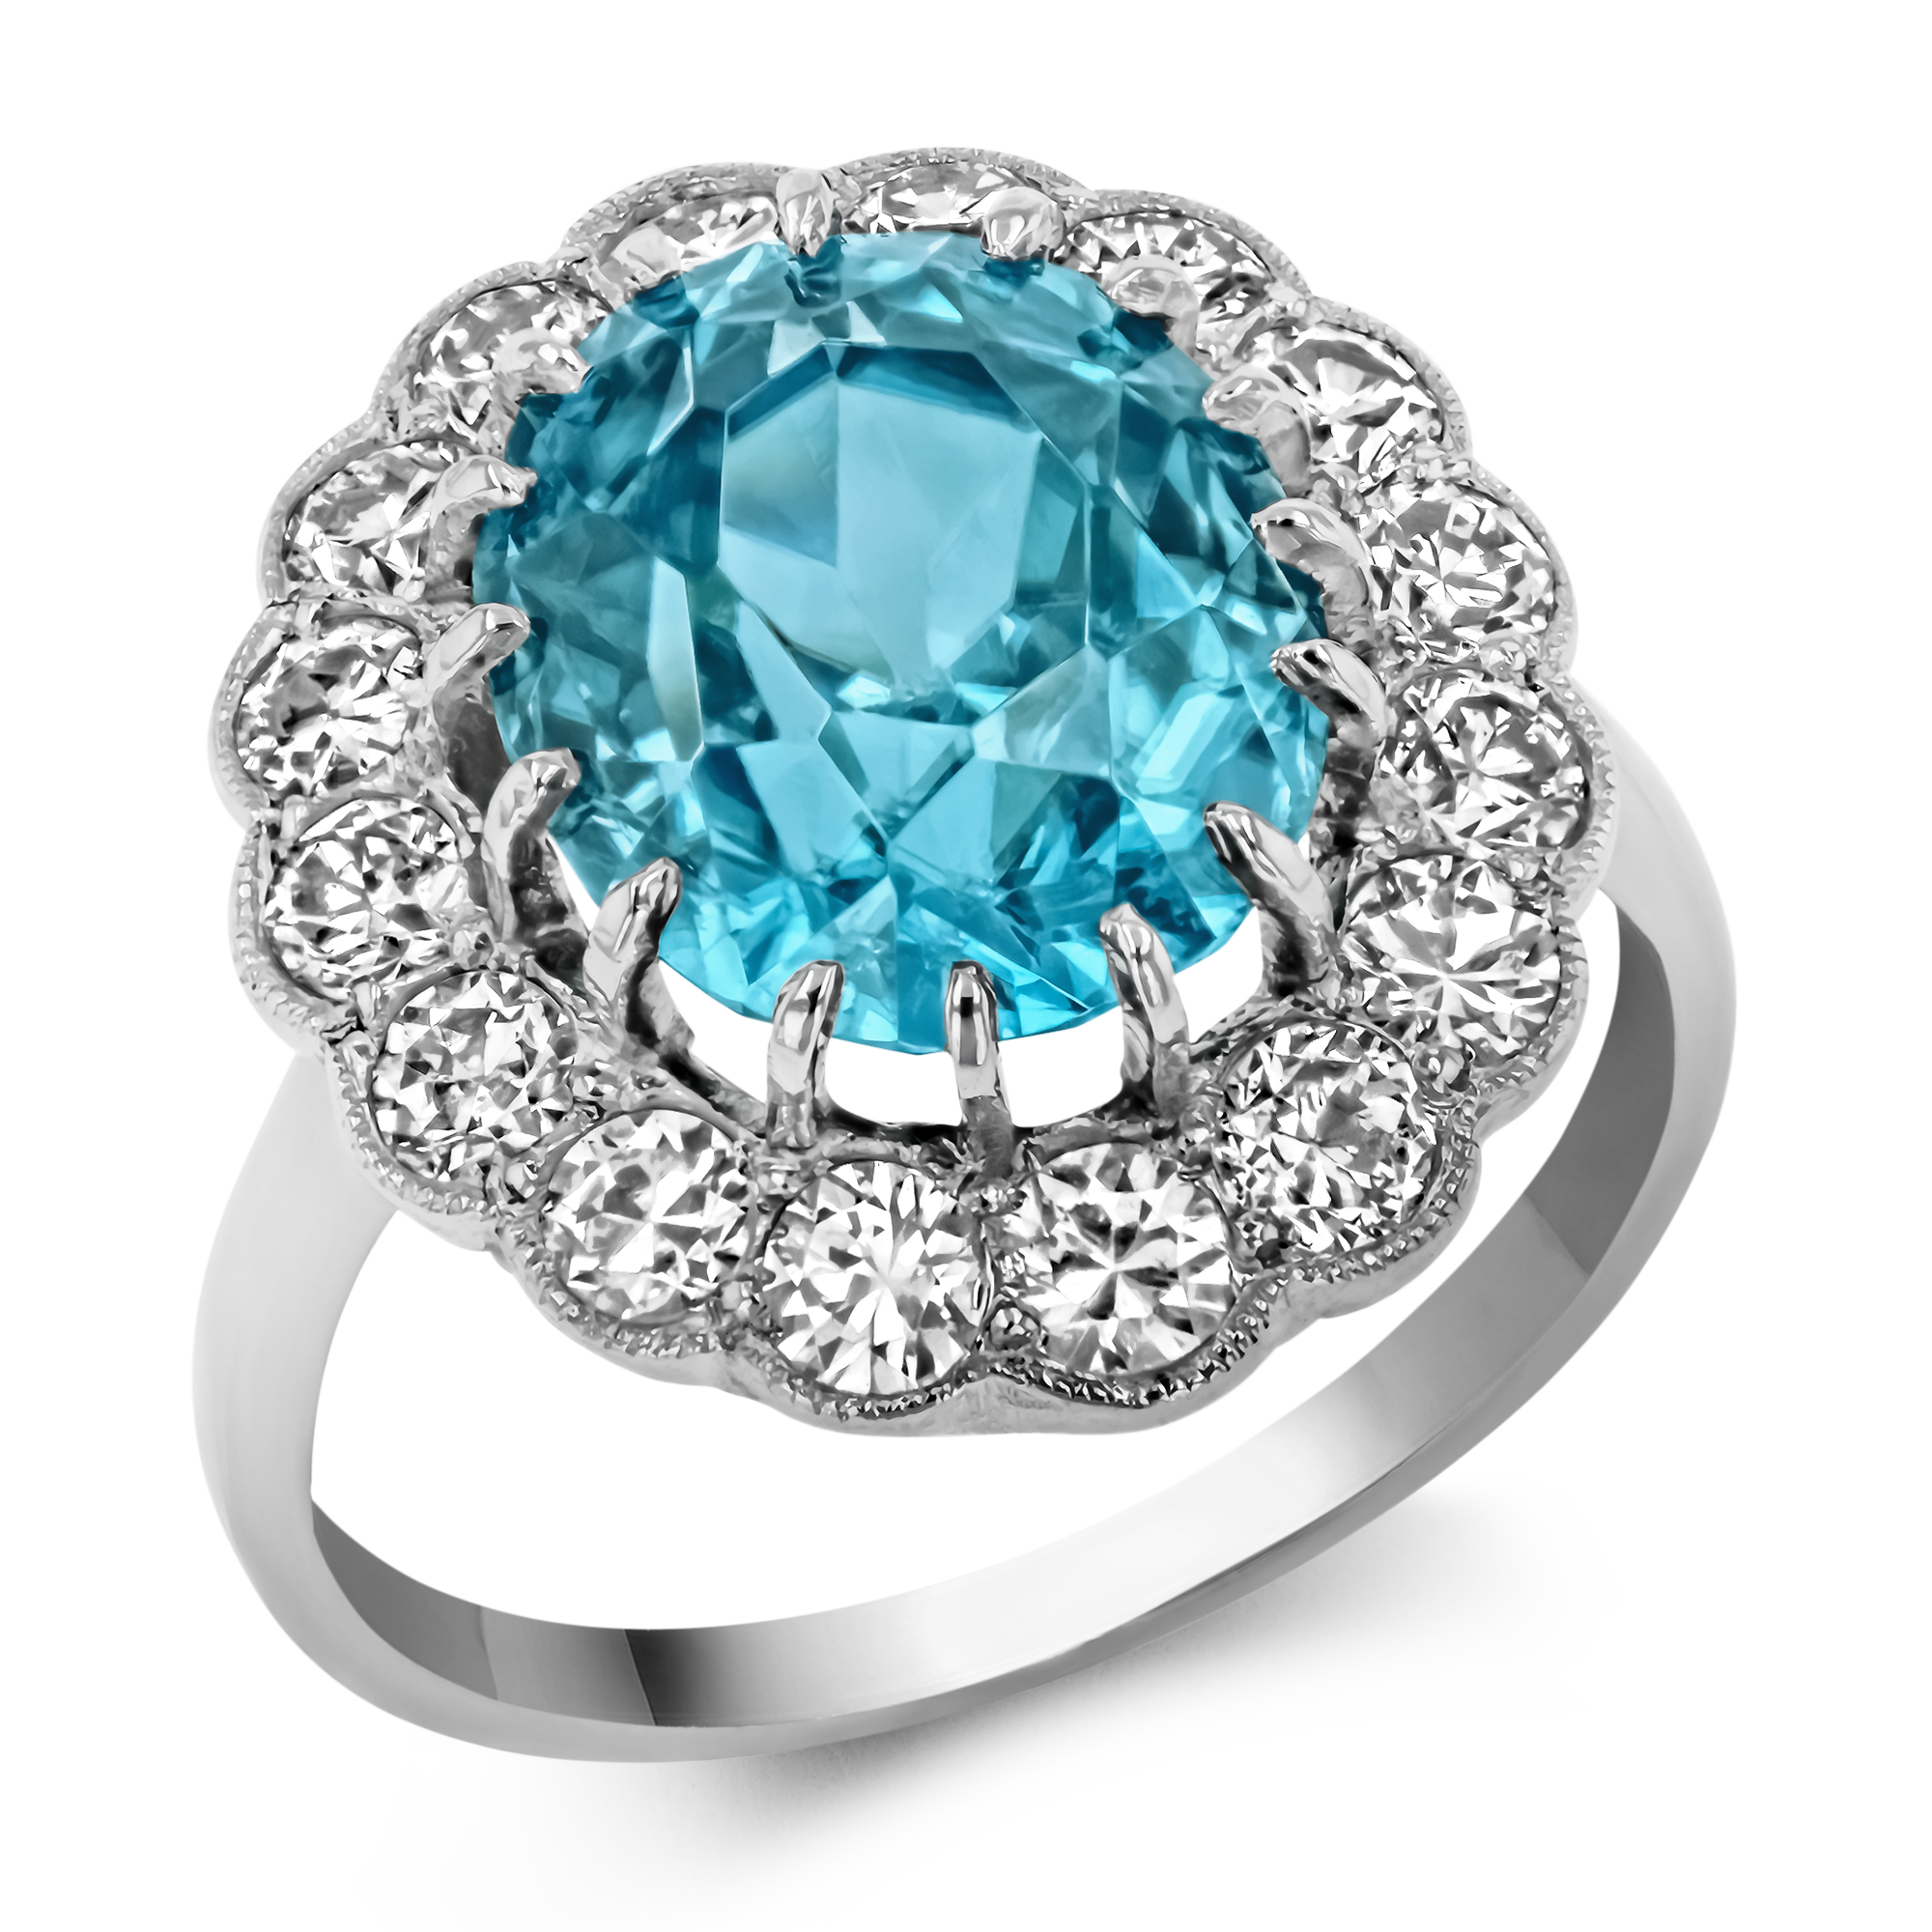 Blue Zircon Cluster Ring with Diamond Surround Oval Cut, Claw Set_1